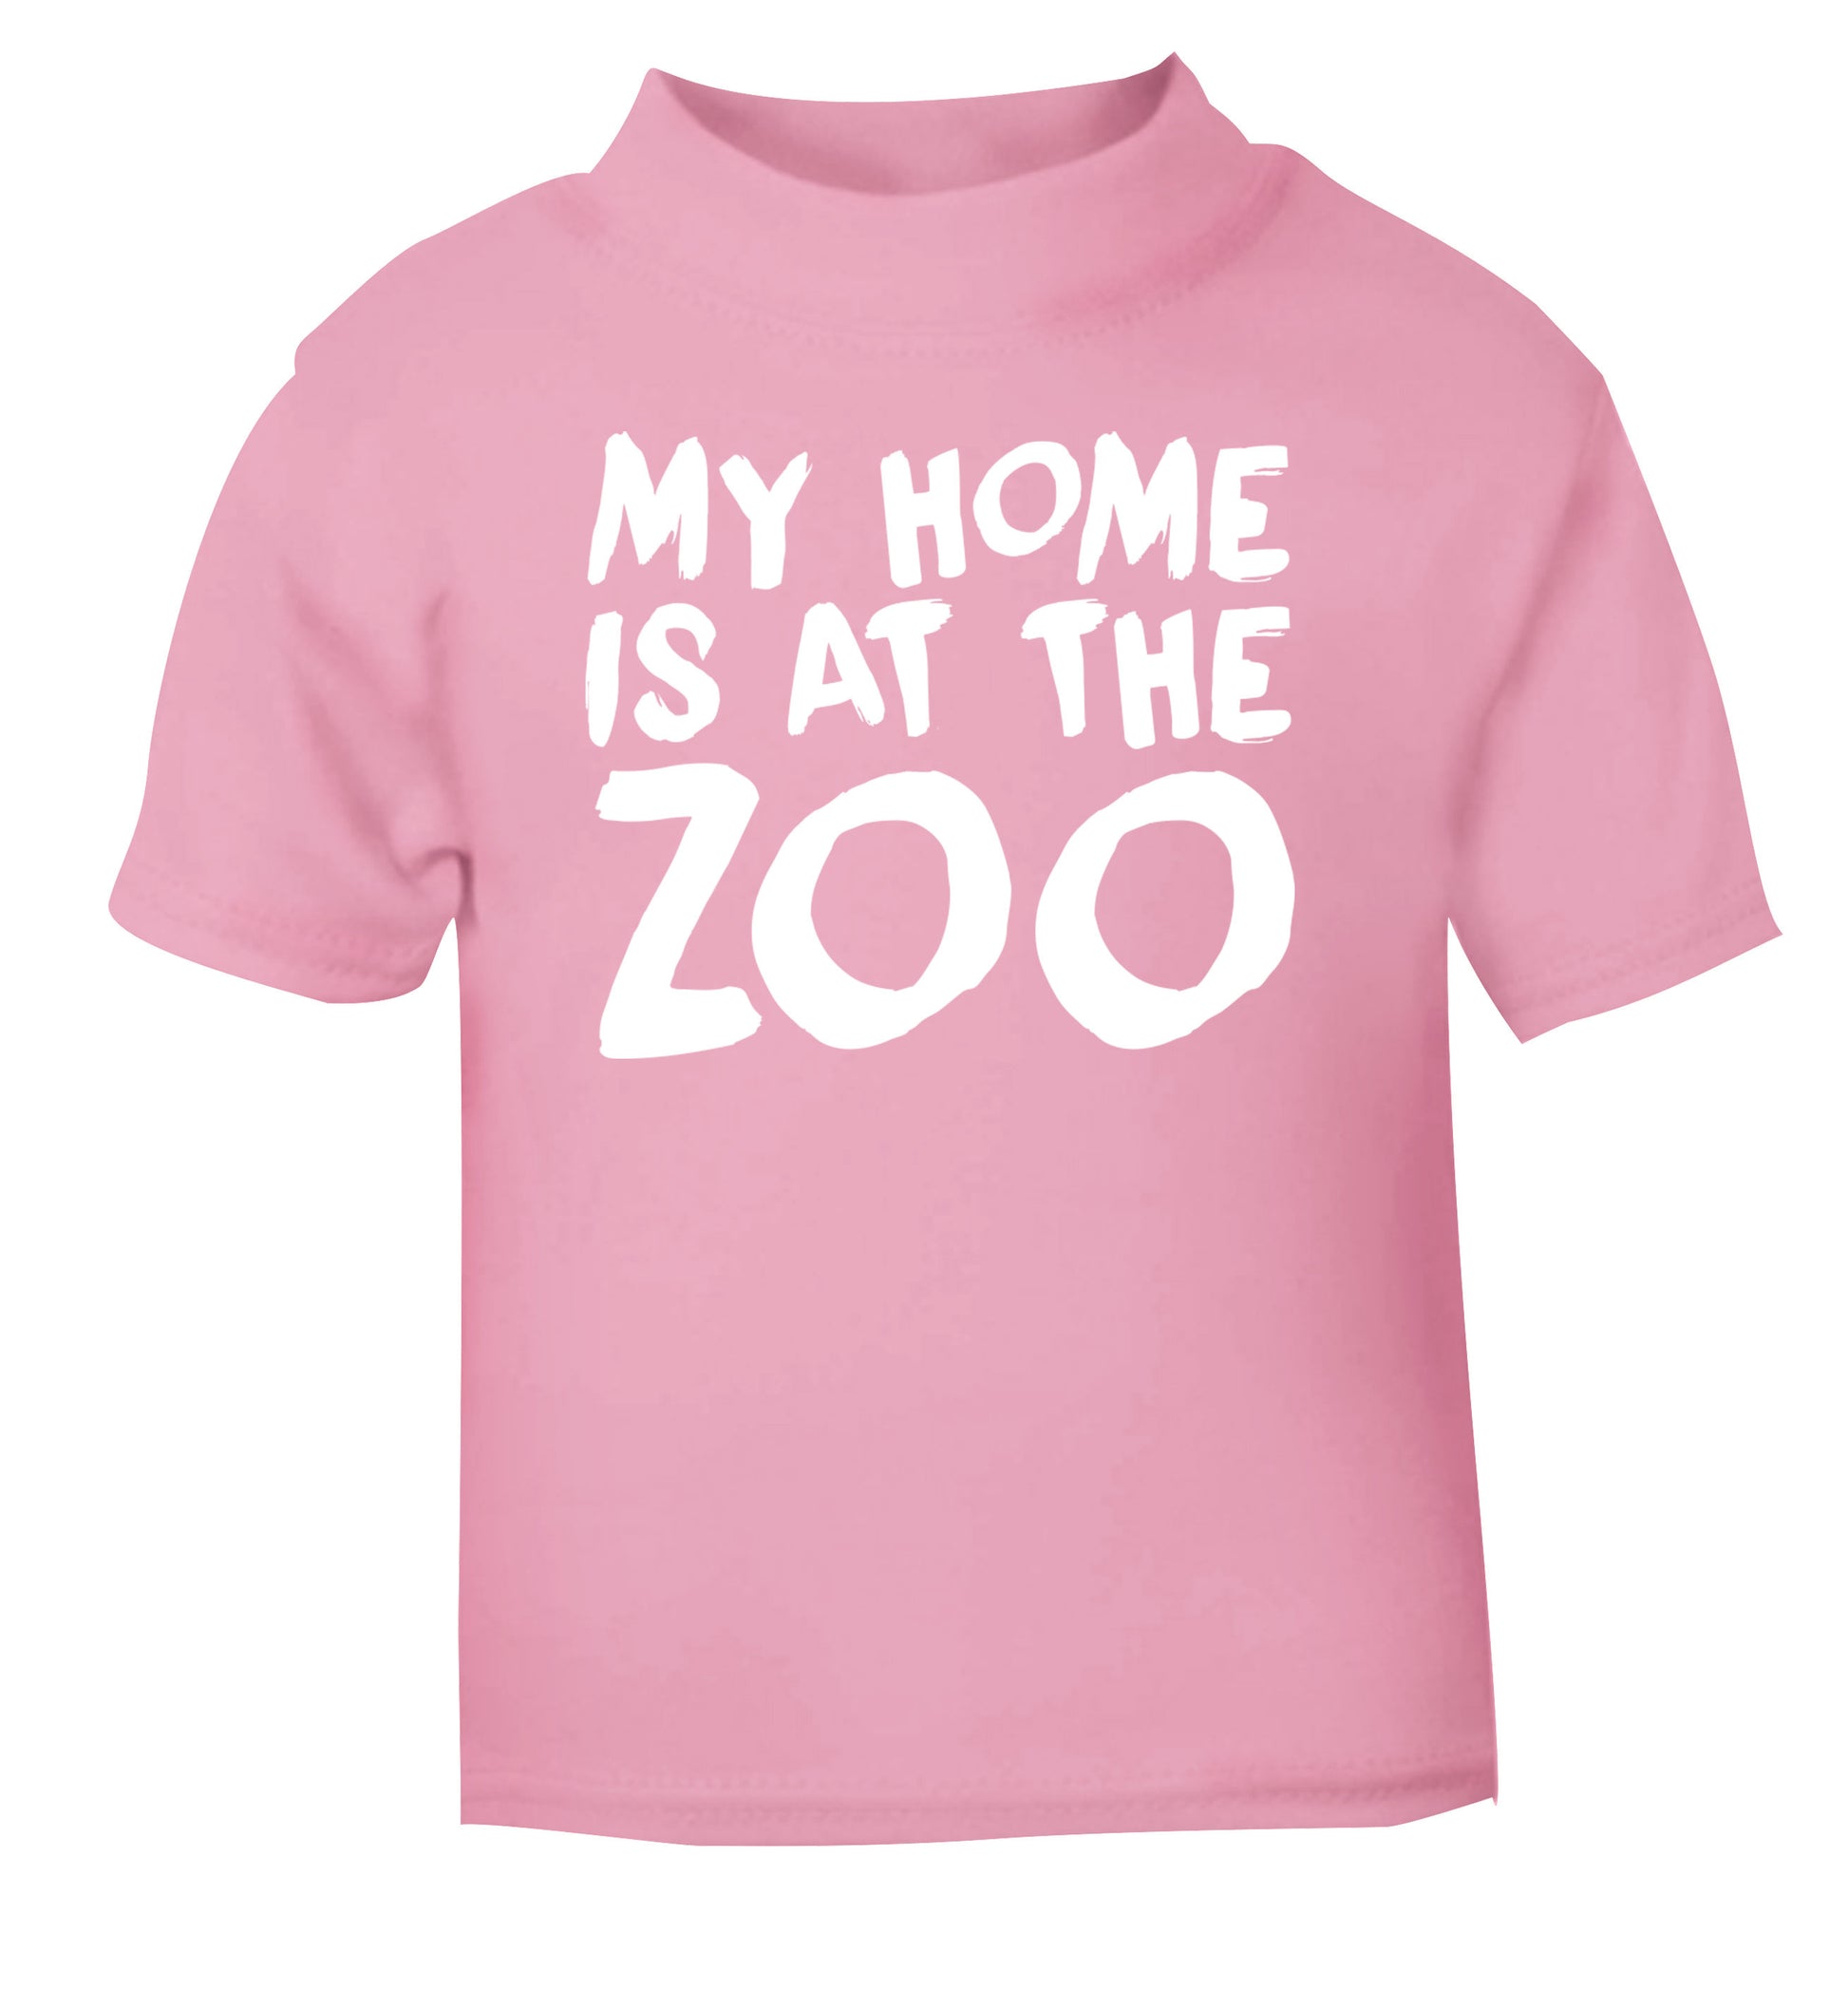 My home is at the zoo light pink Baby Toddler Tshirt 2 Years